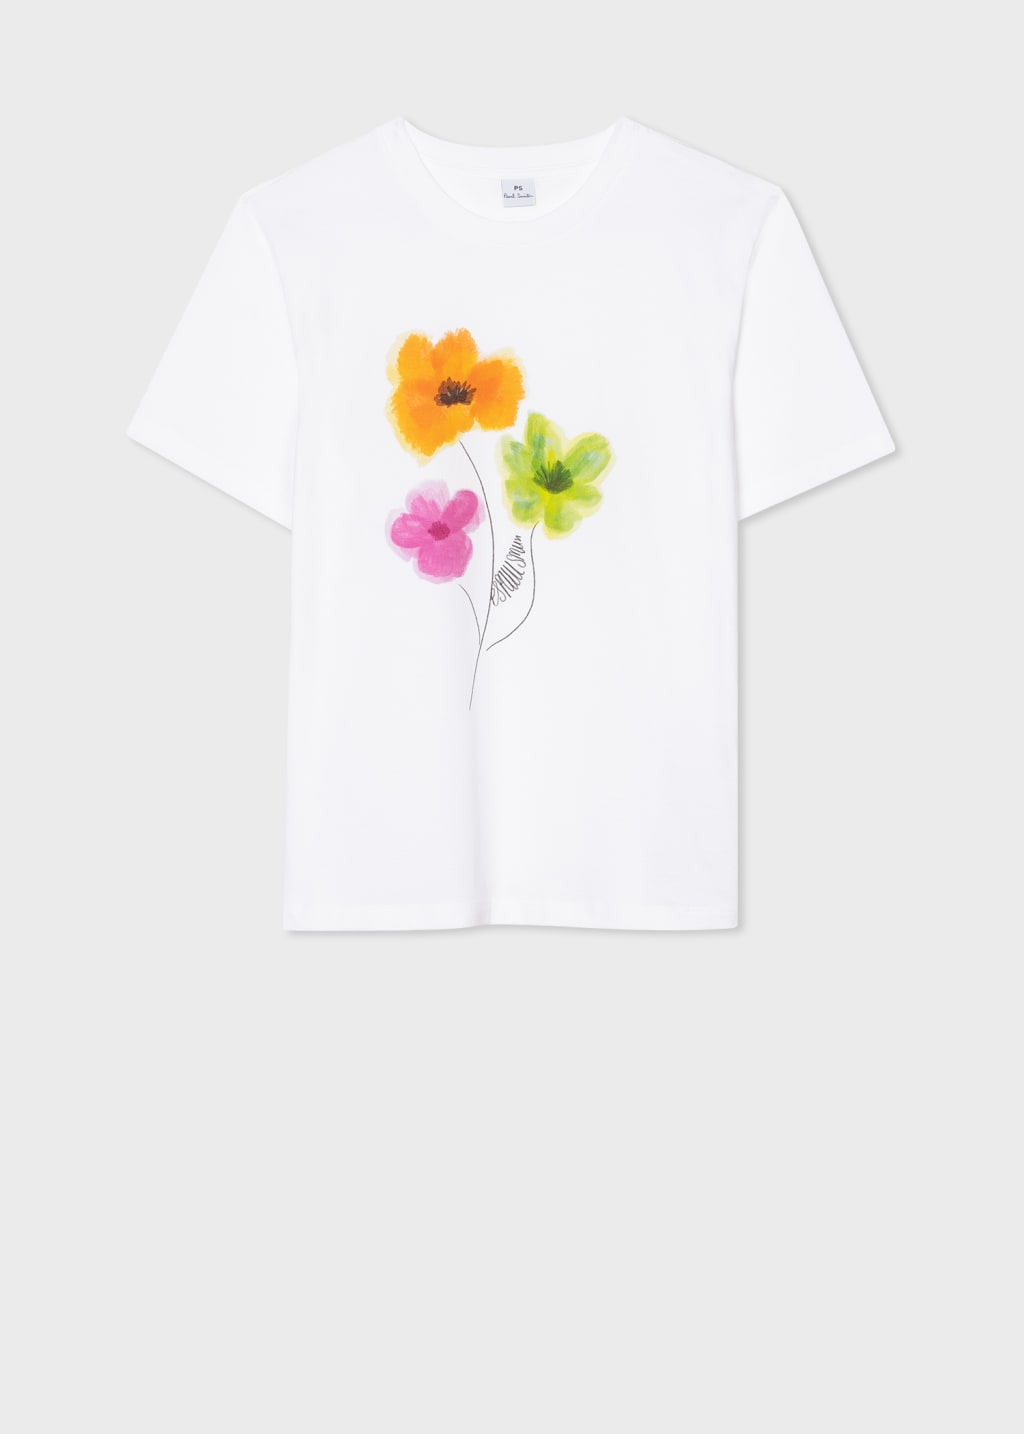 Front View - Women's White 'Brushed Poppies' T-Shirt Paul Smith